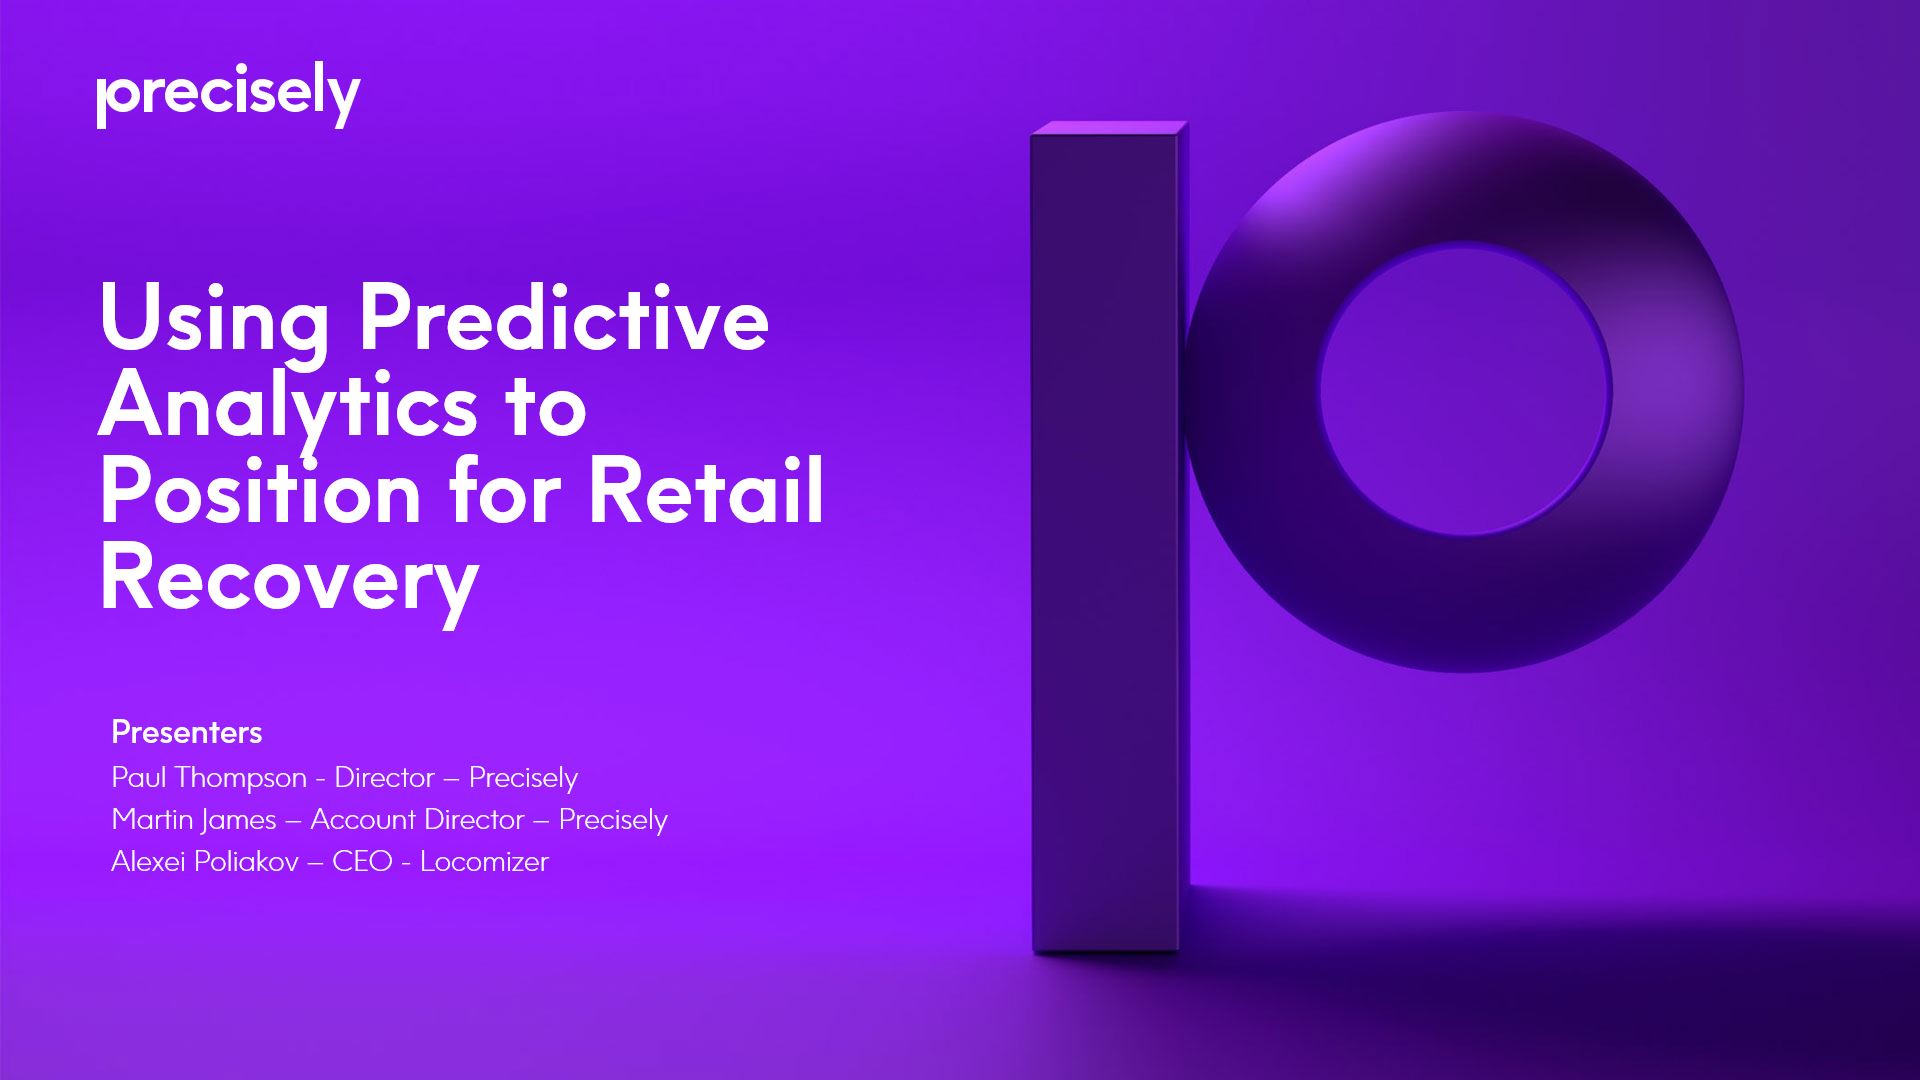 Positioning for Retail Recovery: The Role of Predictive Analytics Fueled by Mobile Trace Data